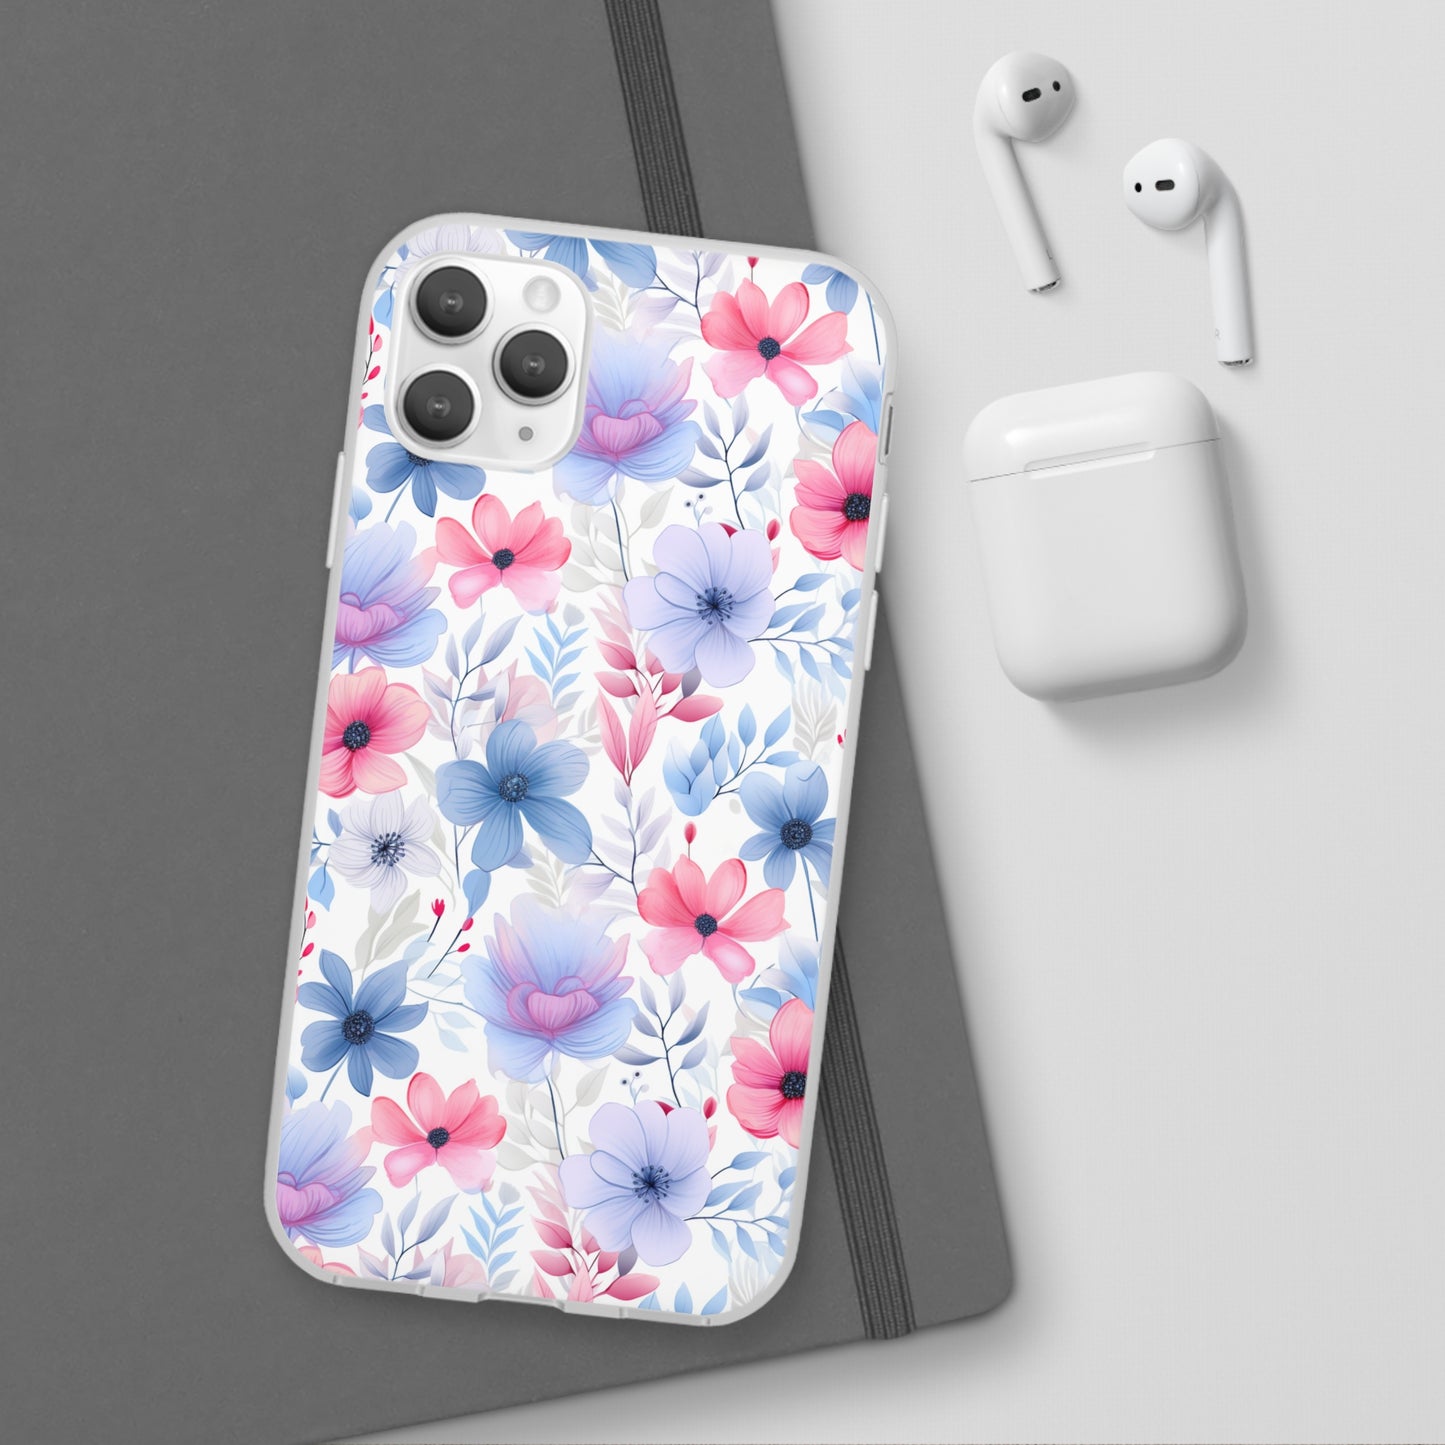 Floral Whispers - Soft Hues of Violets, Pinks, and Blues - Flexi Phone Case Phone Case Pattern Symphony iPhone 11 Pro Max with gift packaging  